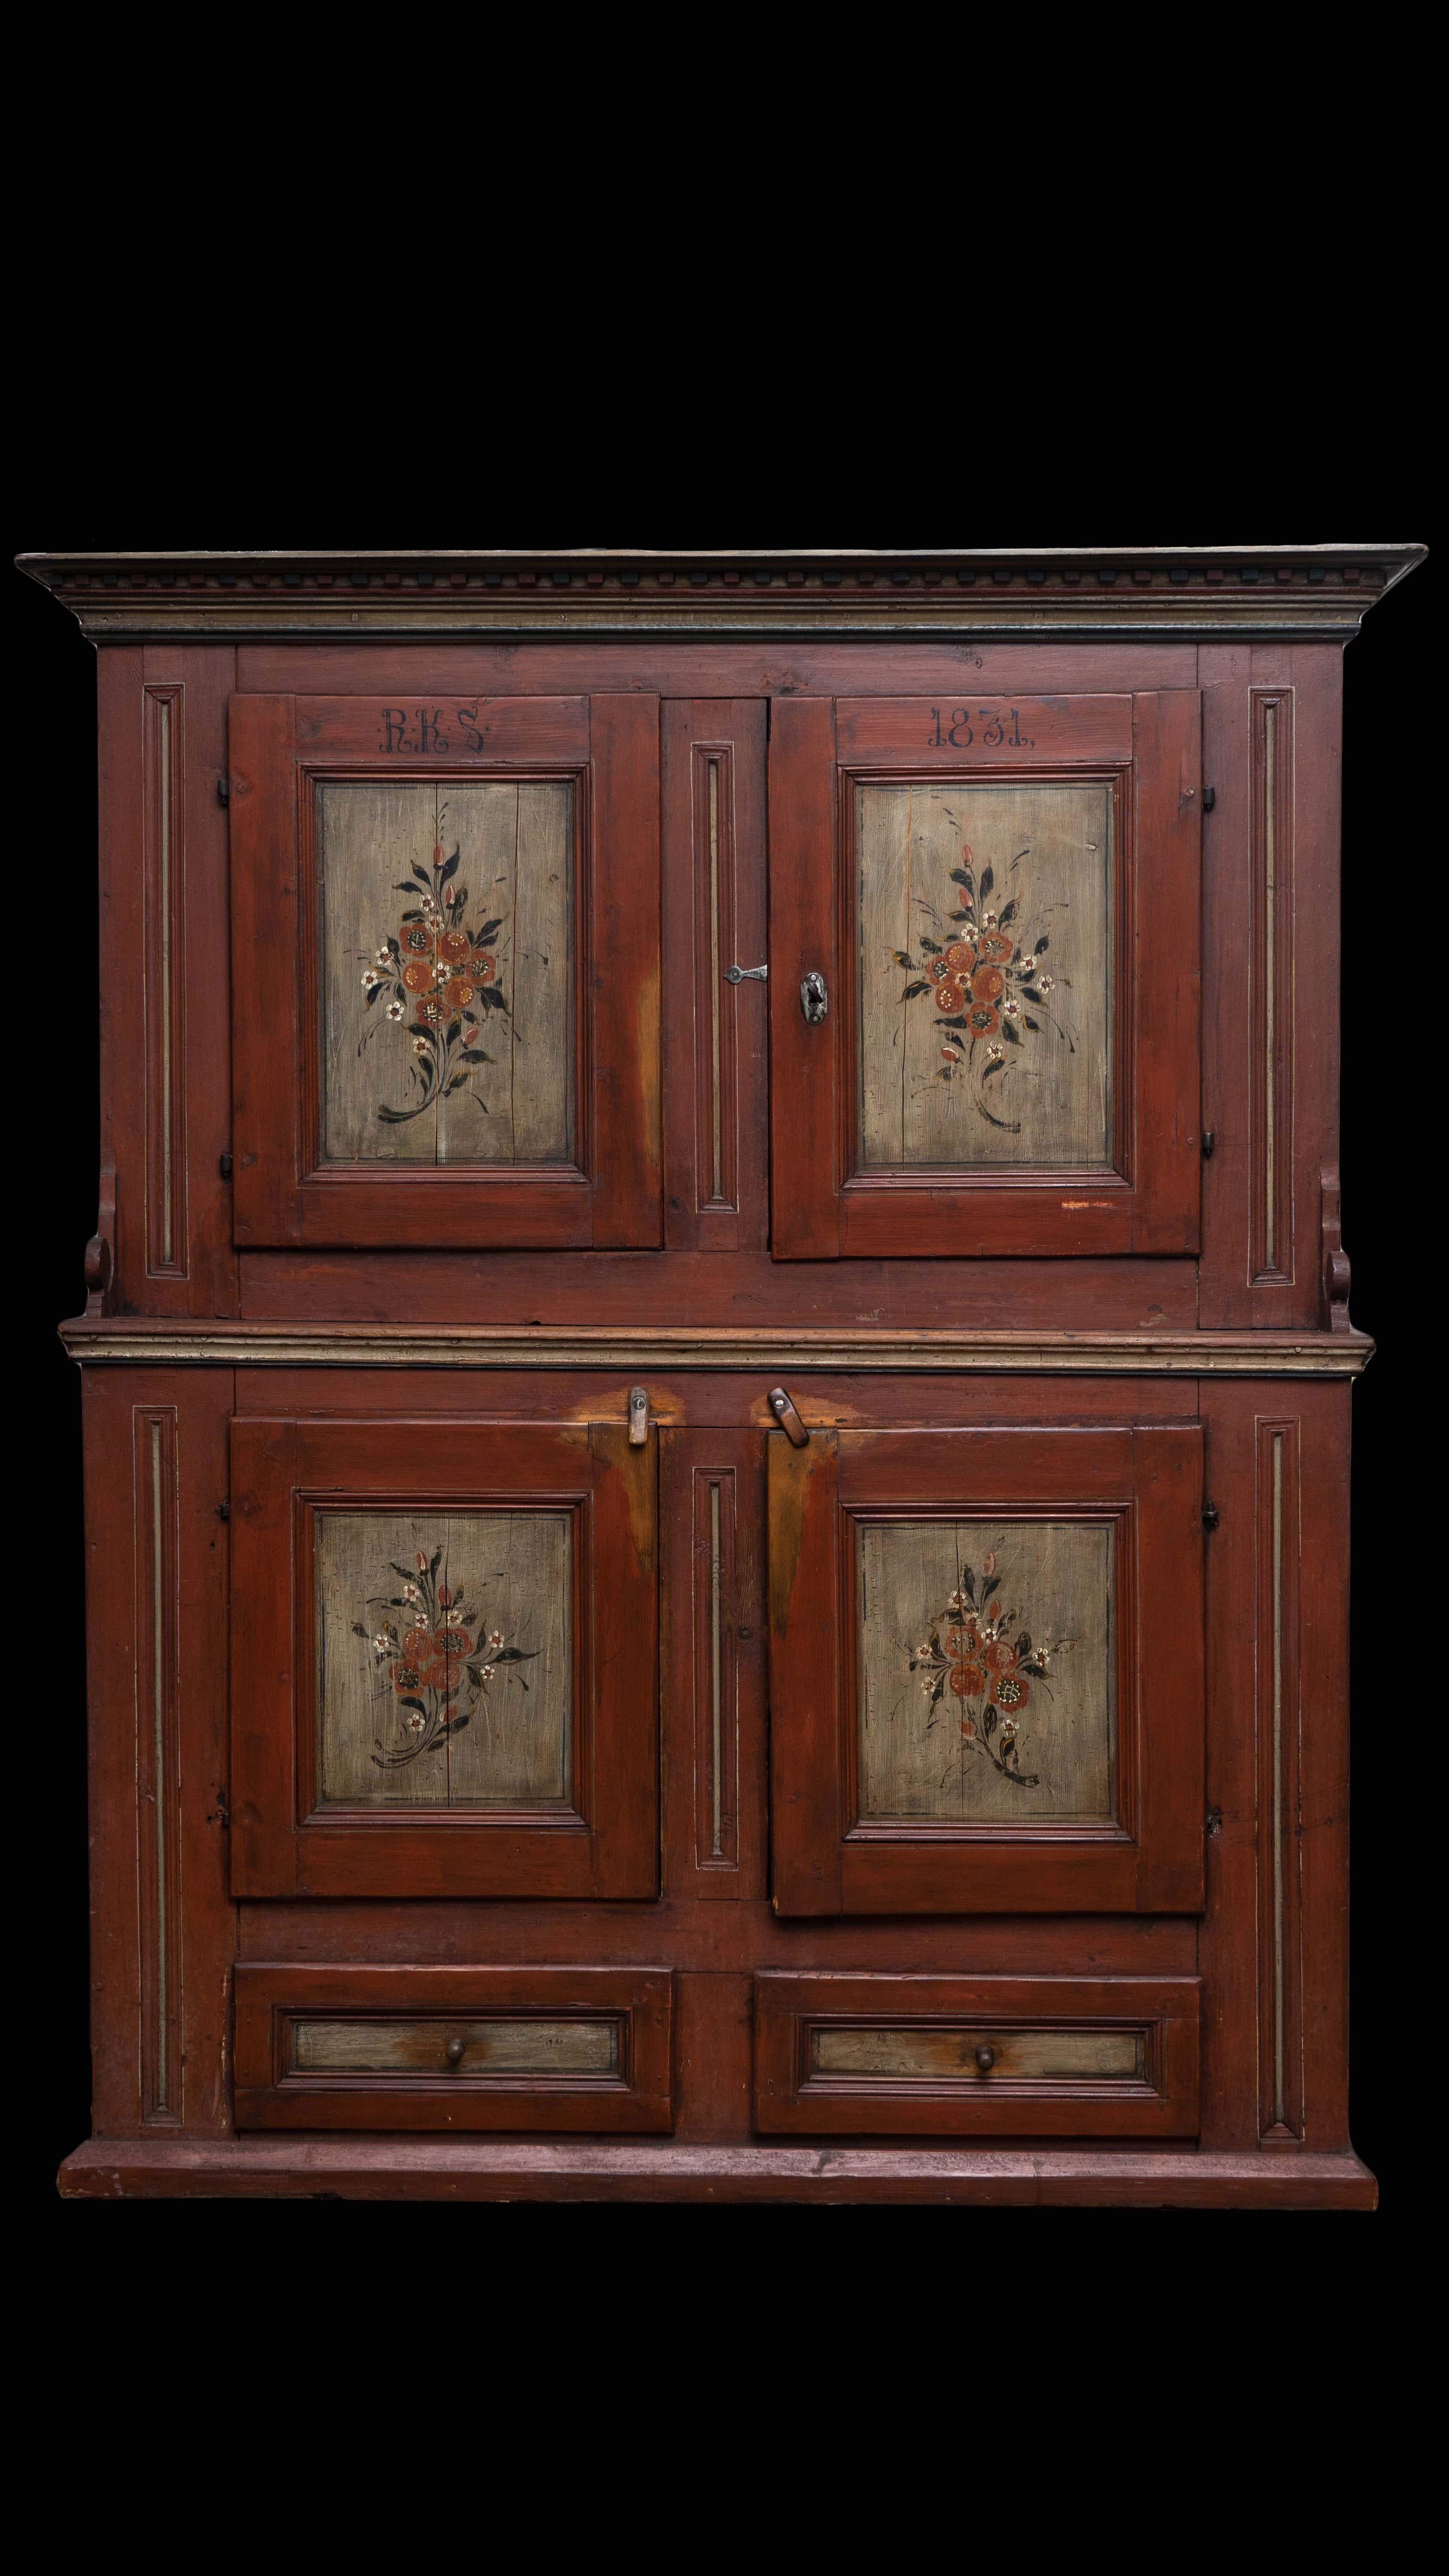 This is a antique Scandinavian cupboard made in 1831 from pine wood. This cupboard has a step-back design where the upper section is set back from the lower section. It has a robust, polychrome-painted dentil cornice at the top, which is a